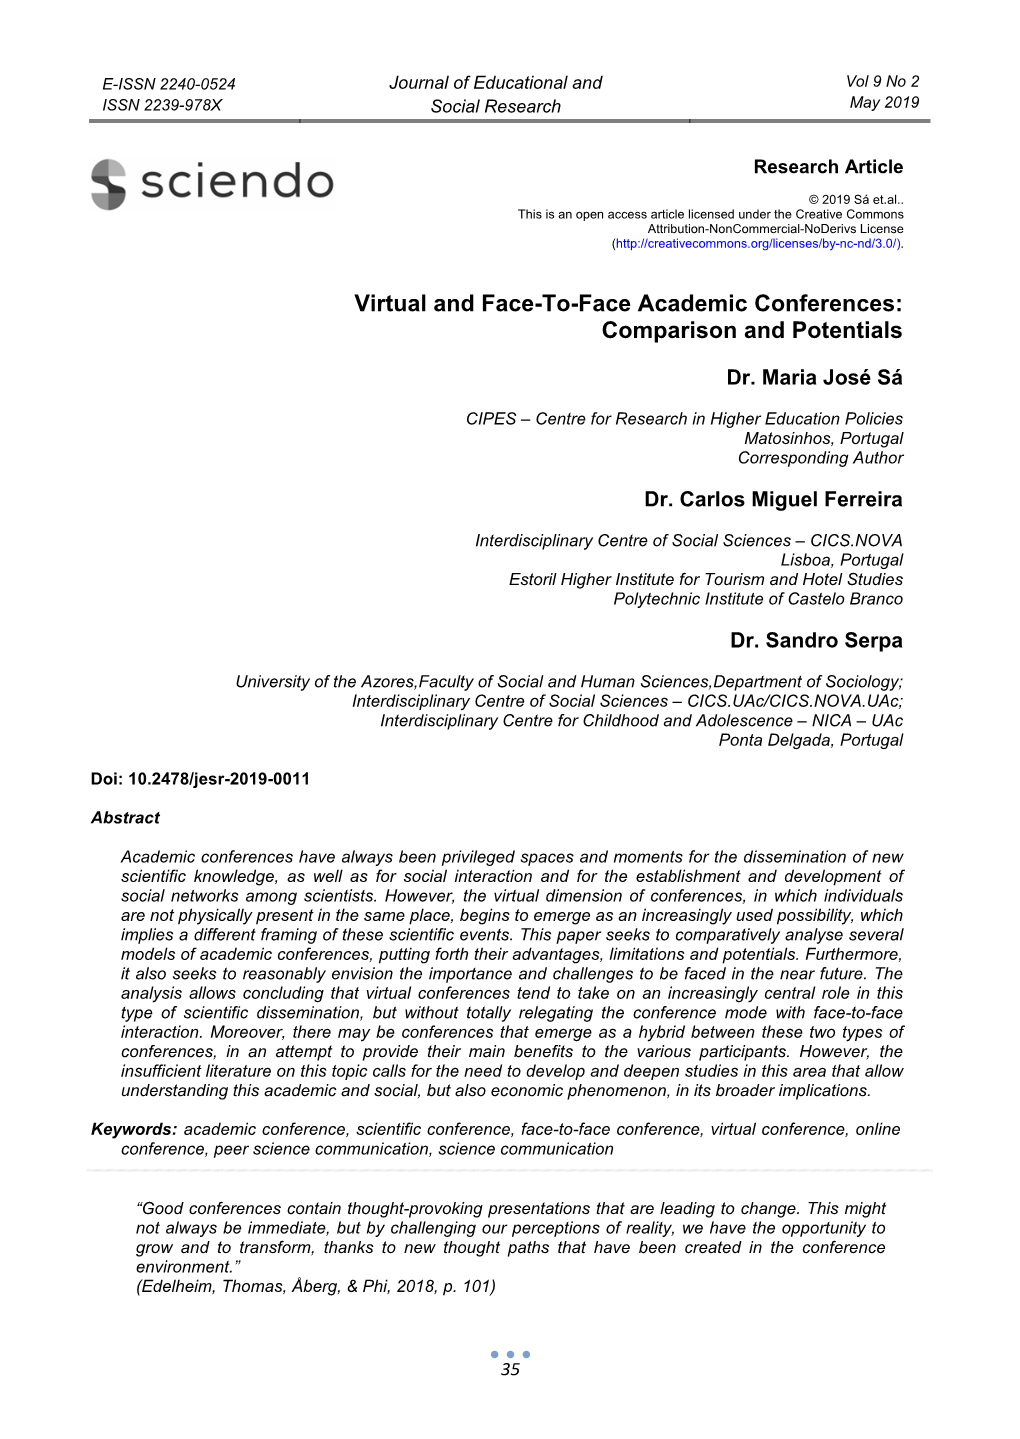 Virtual and Face-To-Face Academic Conferences: Comparison and Potentials